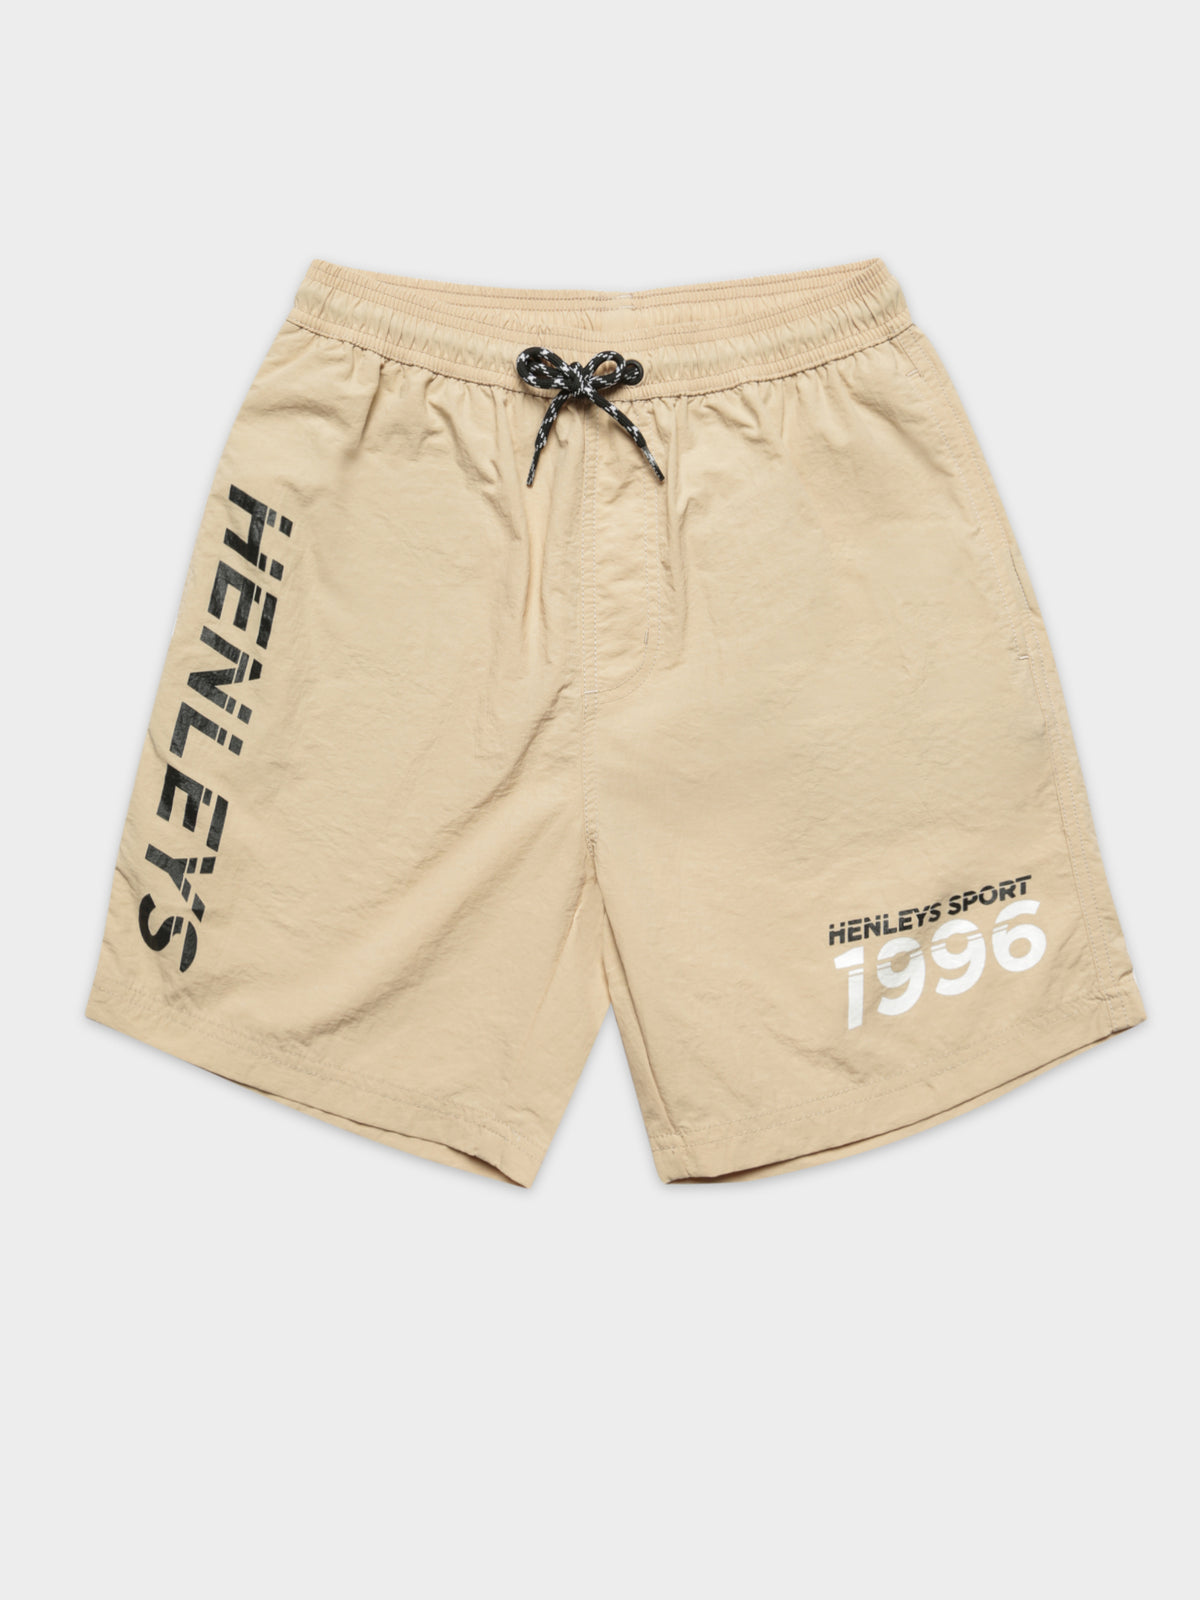 Chester Short in Wheat